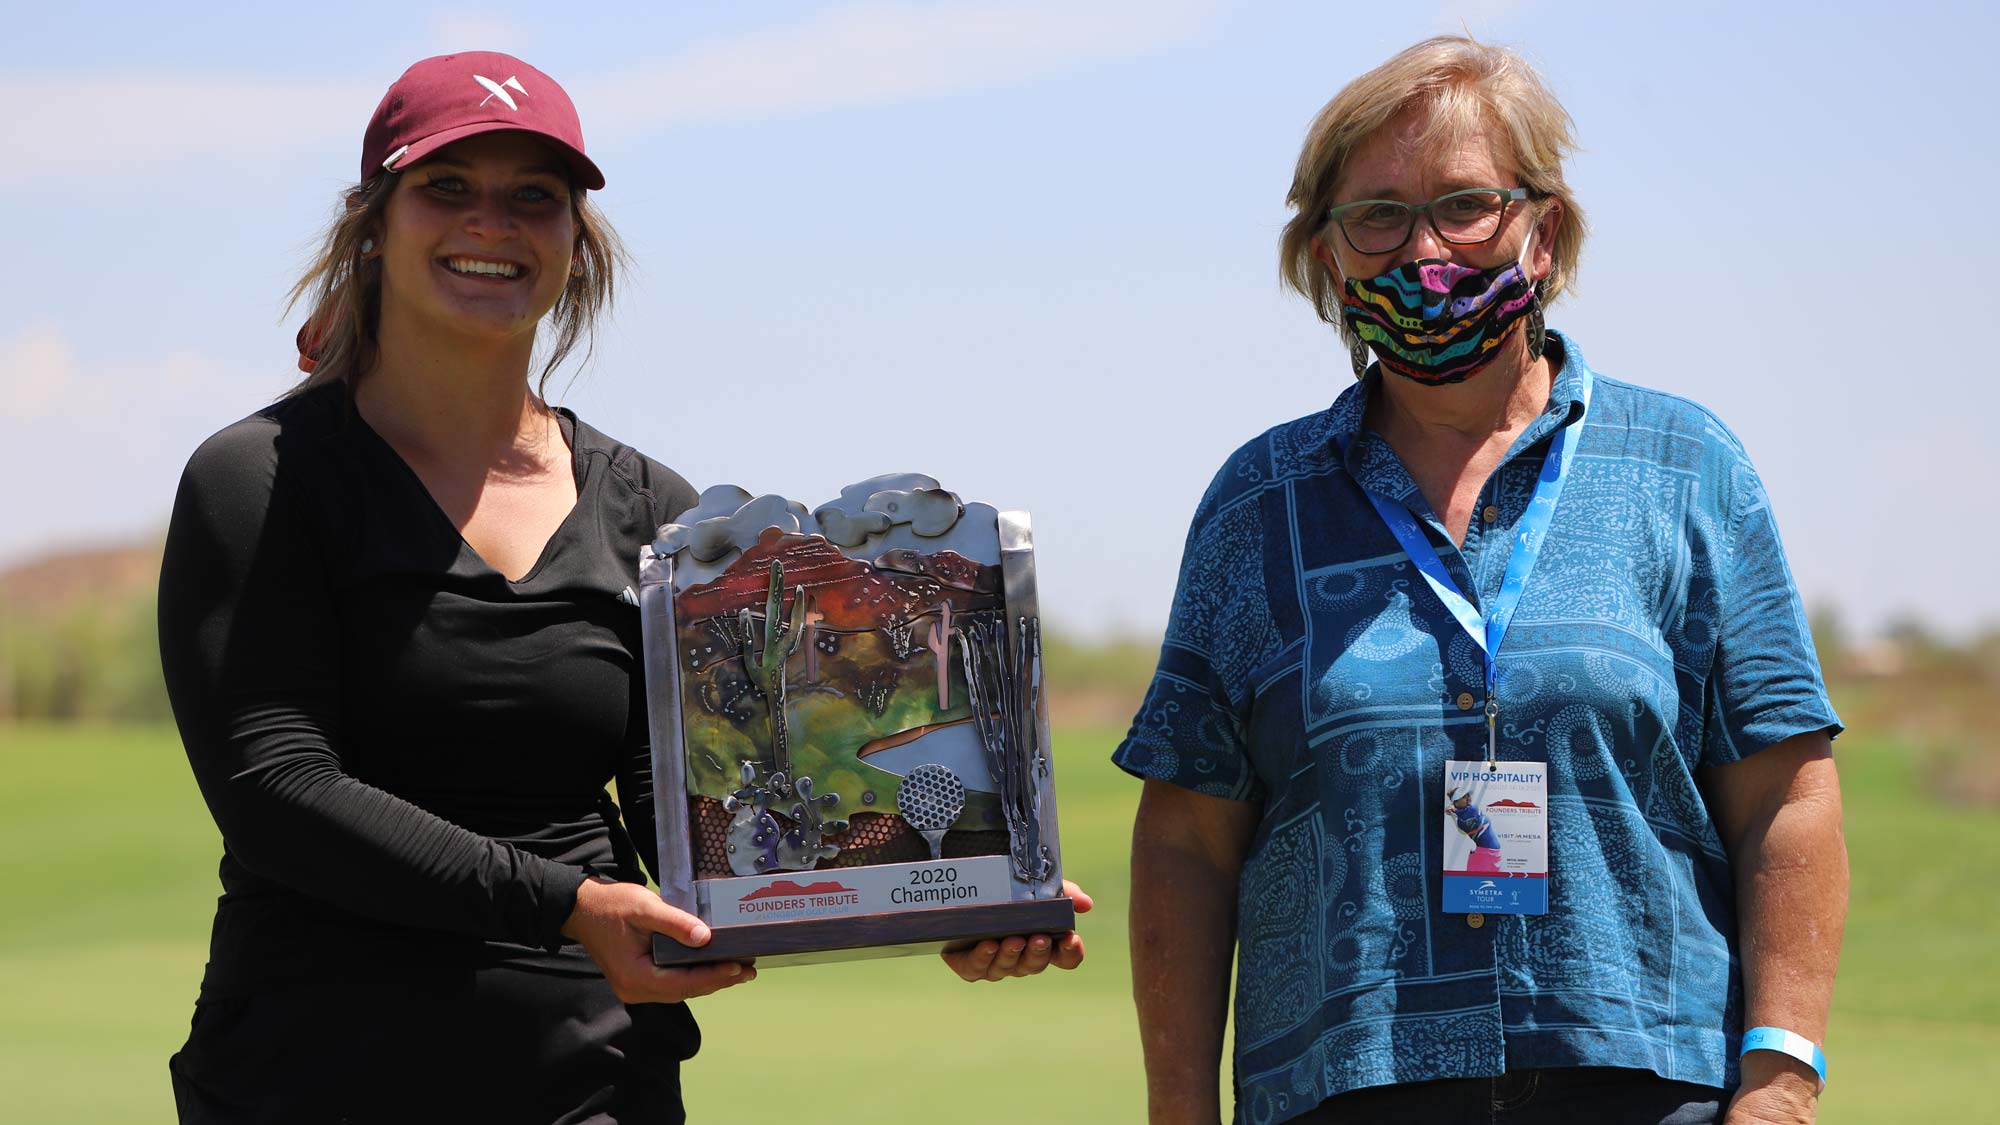 Sarah White Champion with Founders Tribute Trophy Sculptor